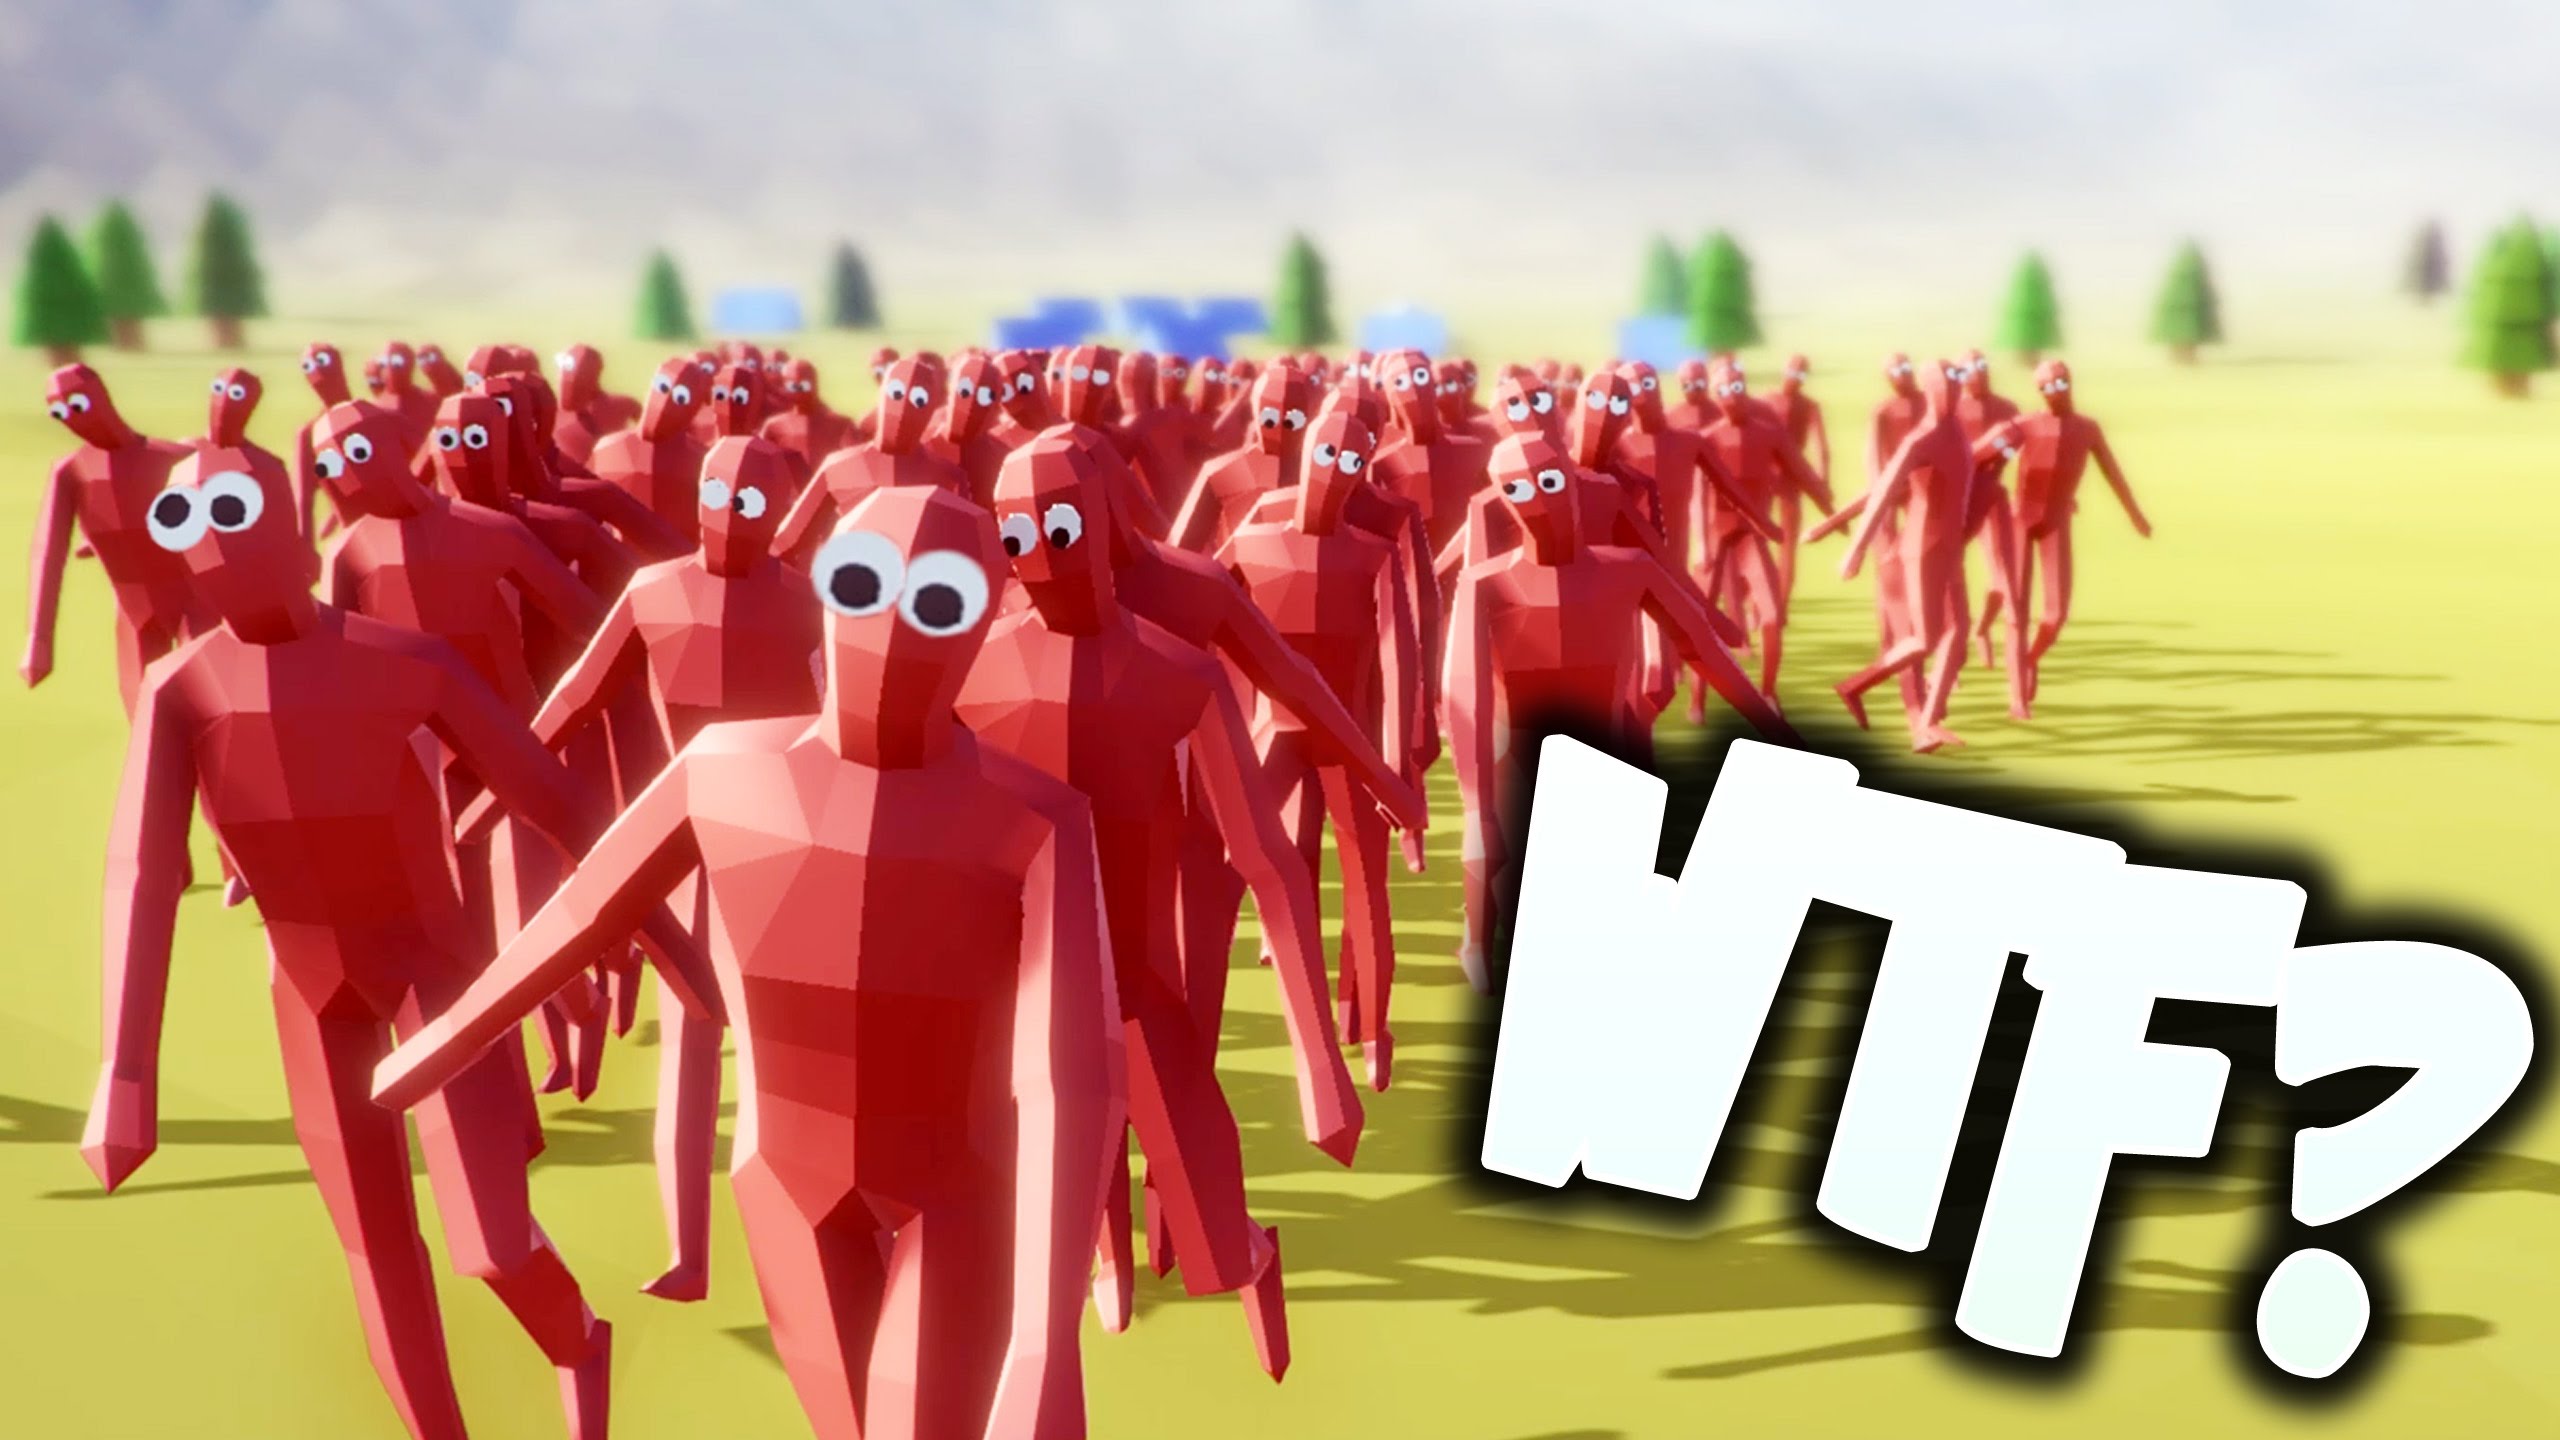 play totally accurate battle simulator